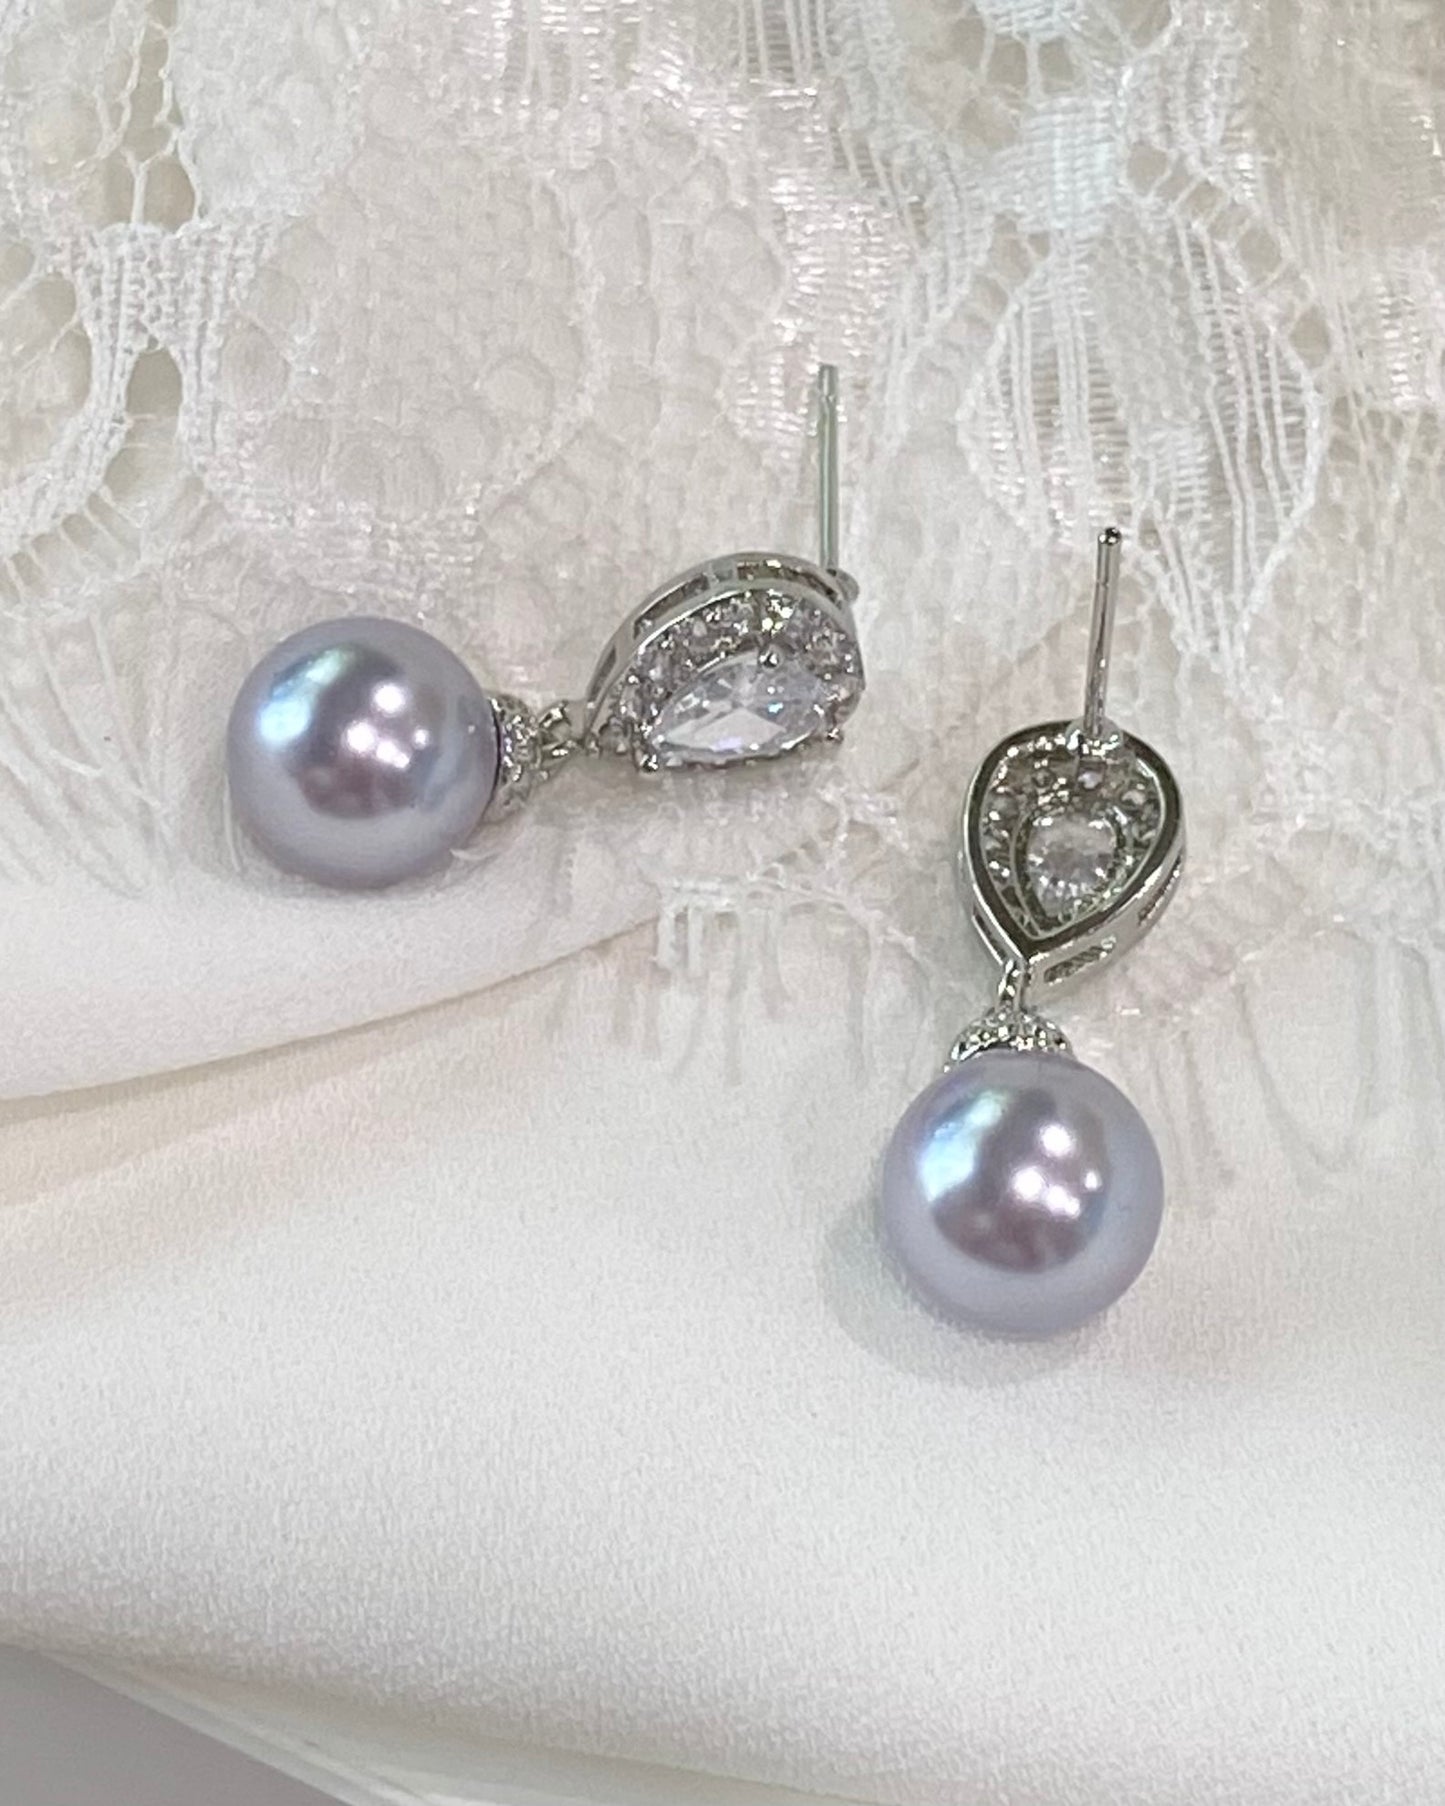 Lesly Light Purple Pearl Necklace and Earrings Set